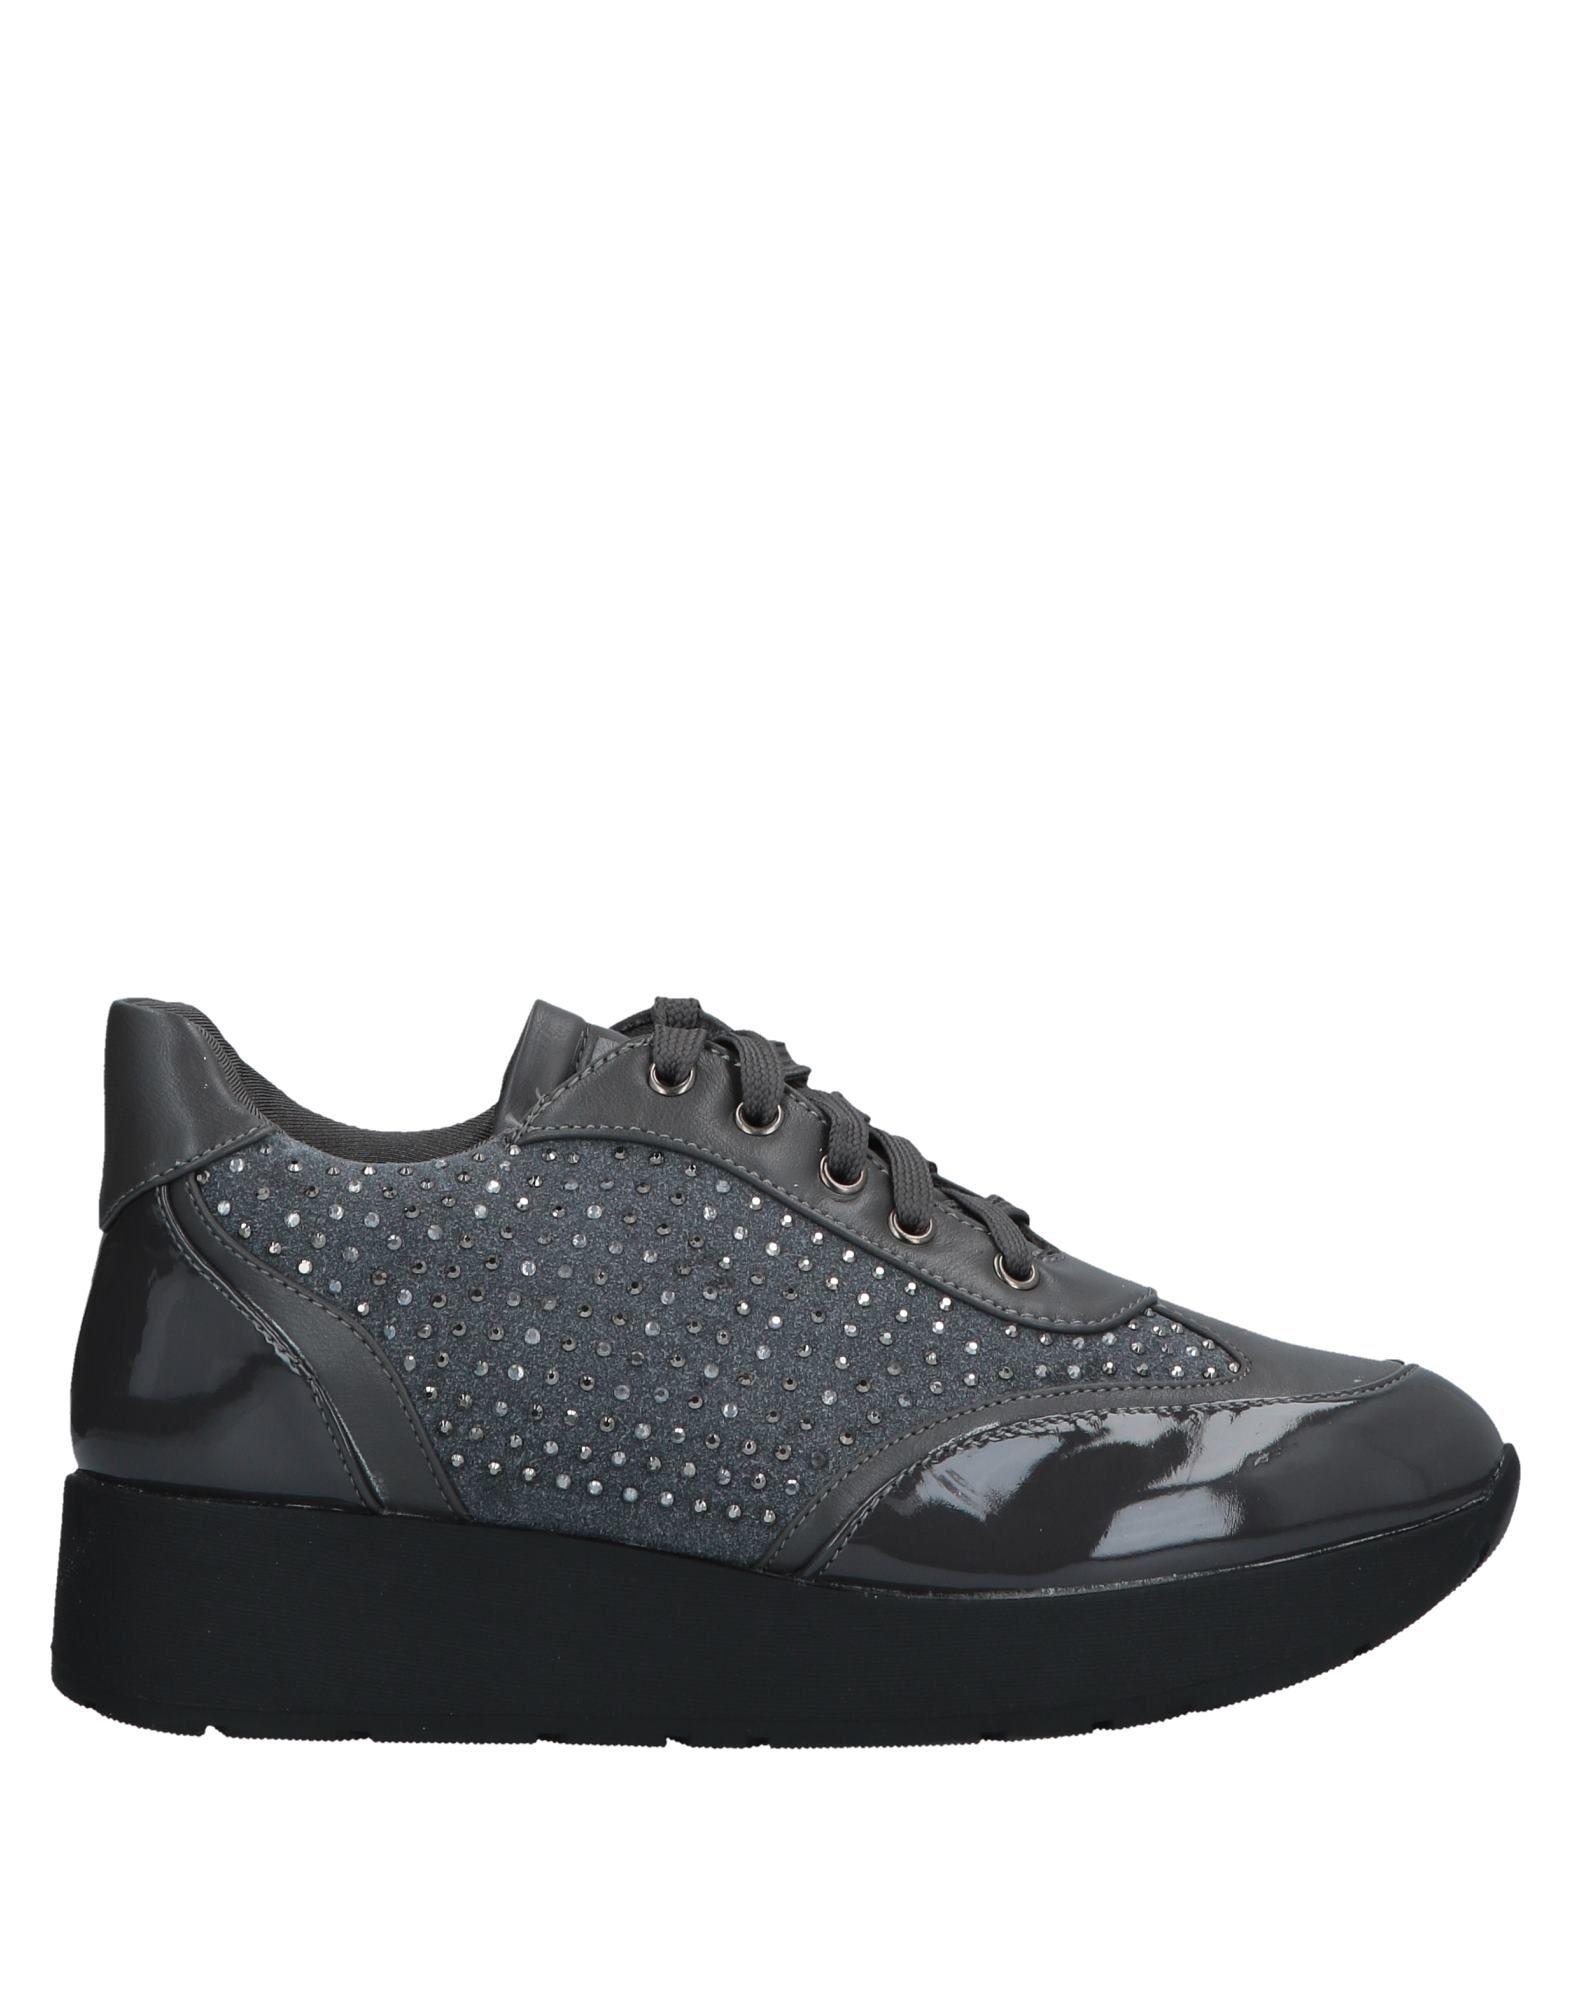 Roccobarocco Low-tops & Sneakers in Grey (Gray) - Lyst